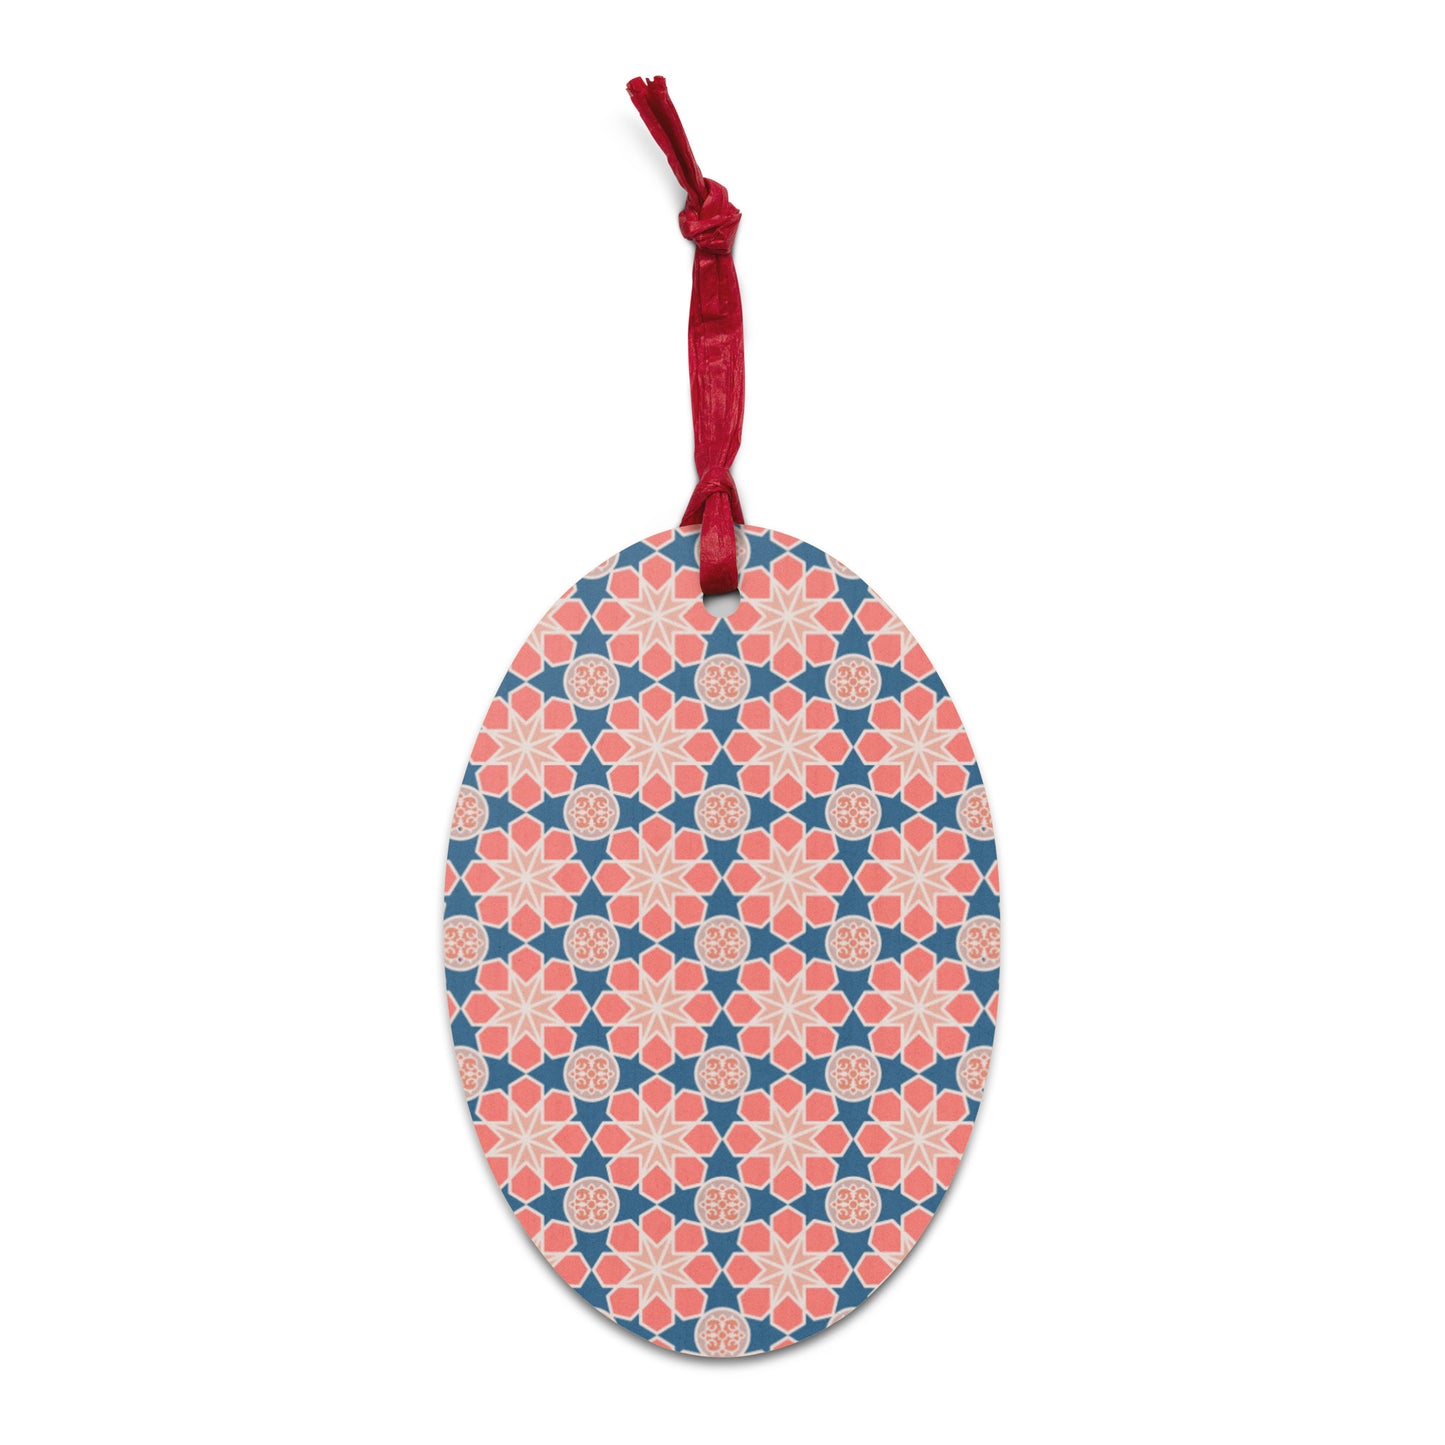 Wooden Holiday Ornaments - Geometric Arabesque Mashup in Pink